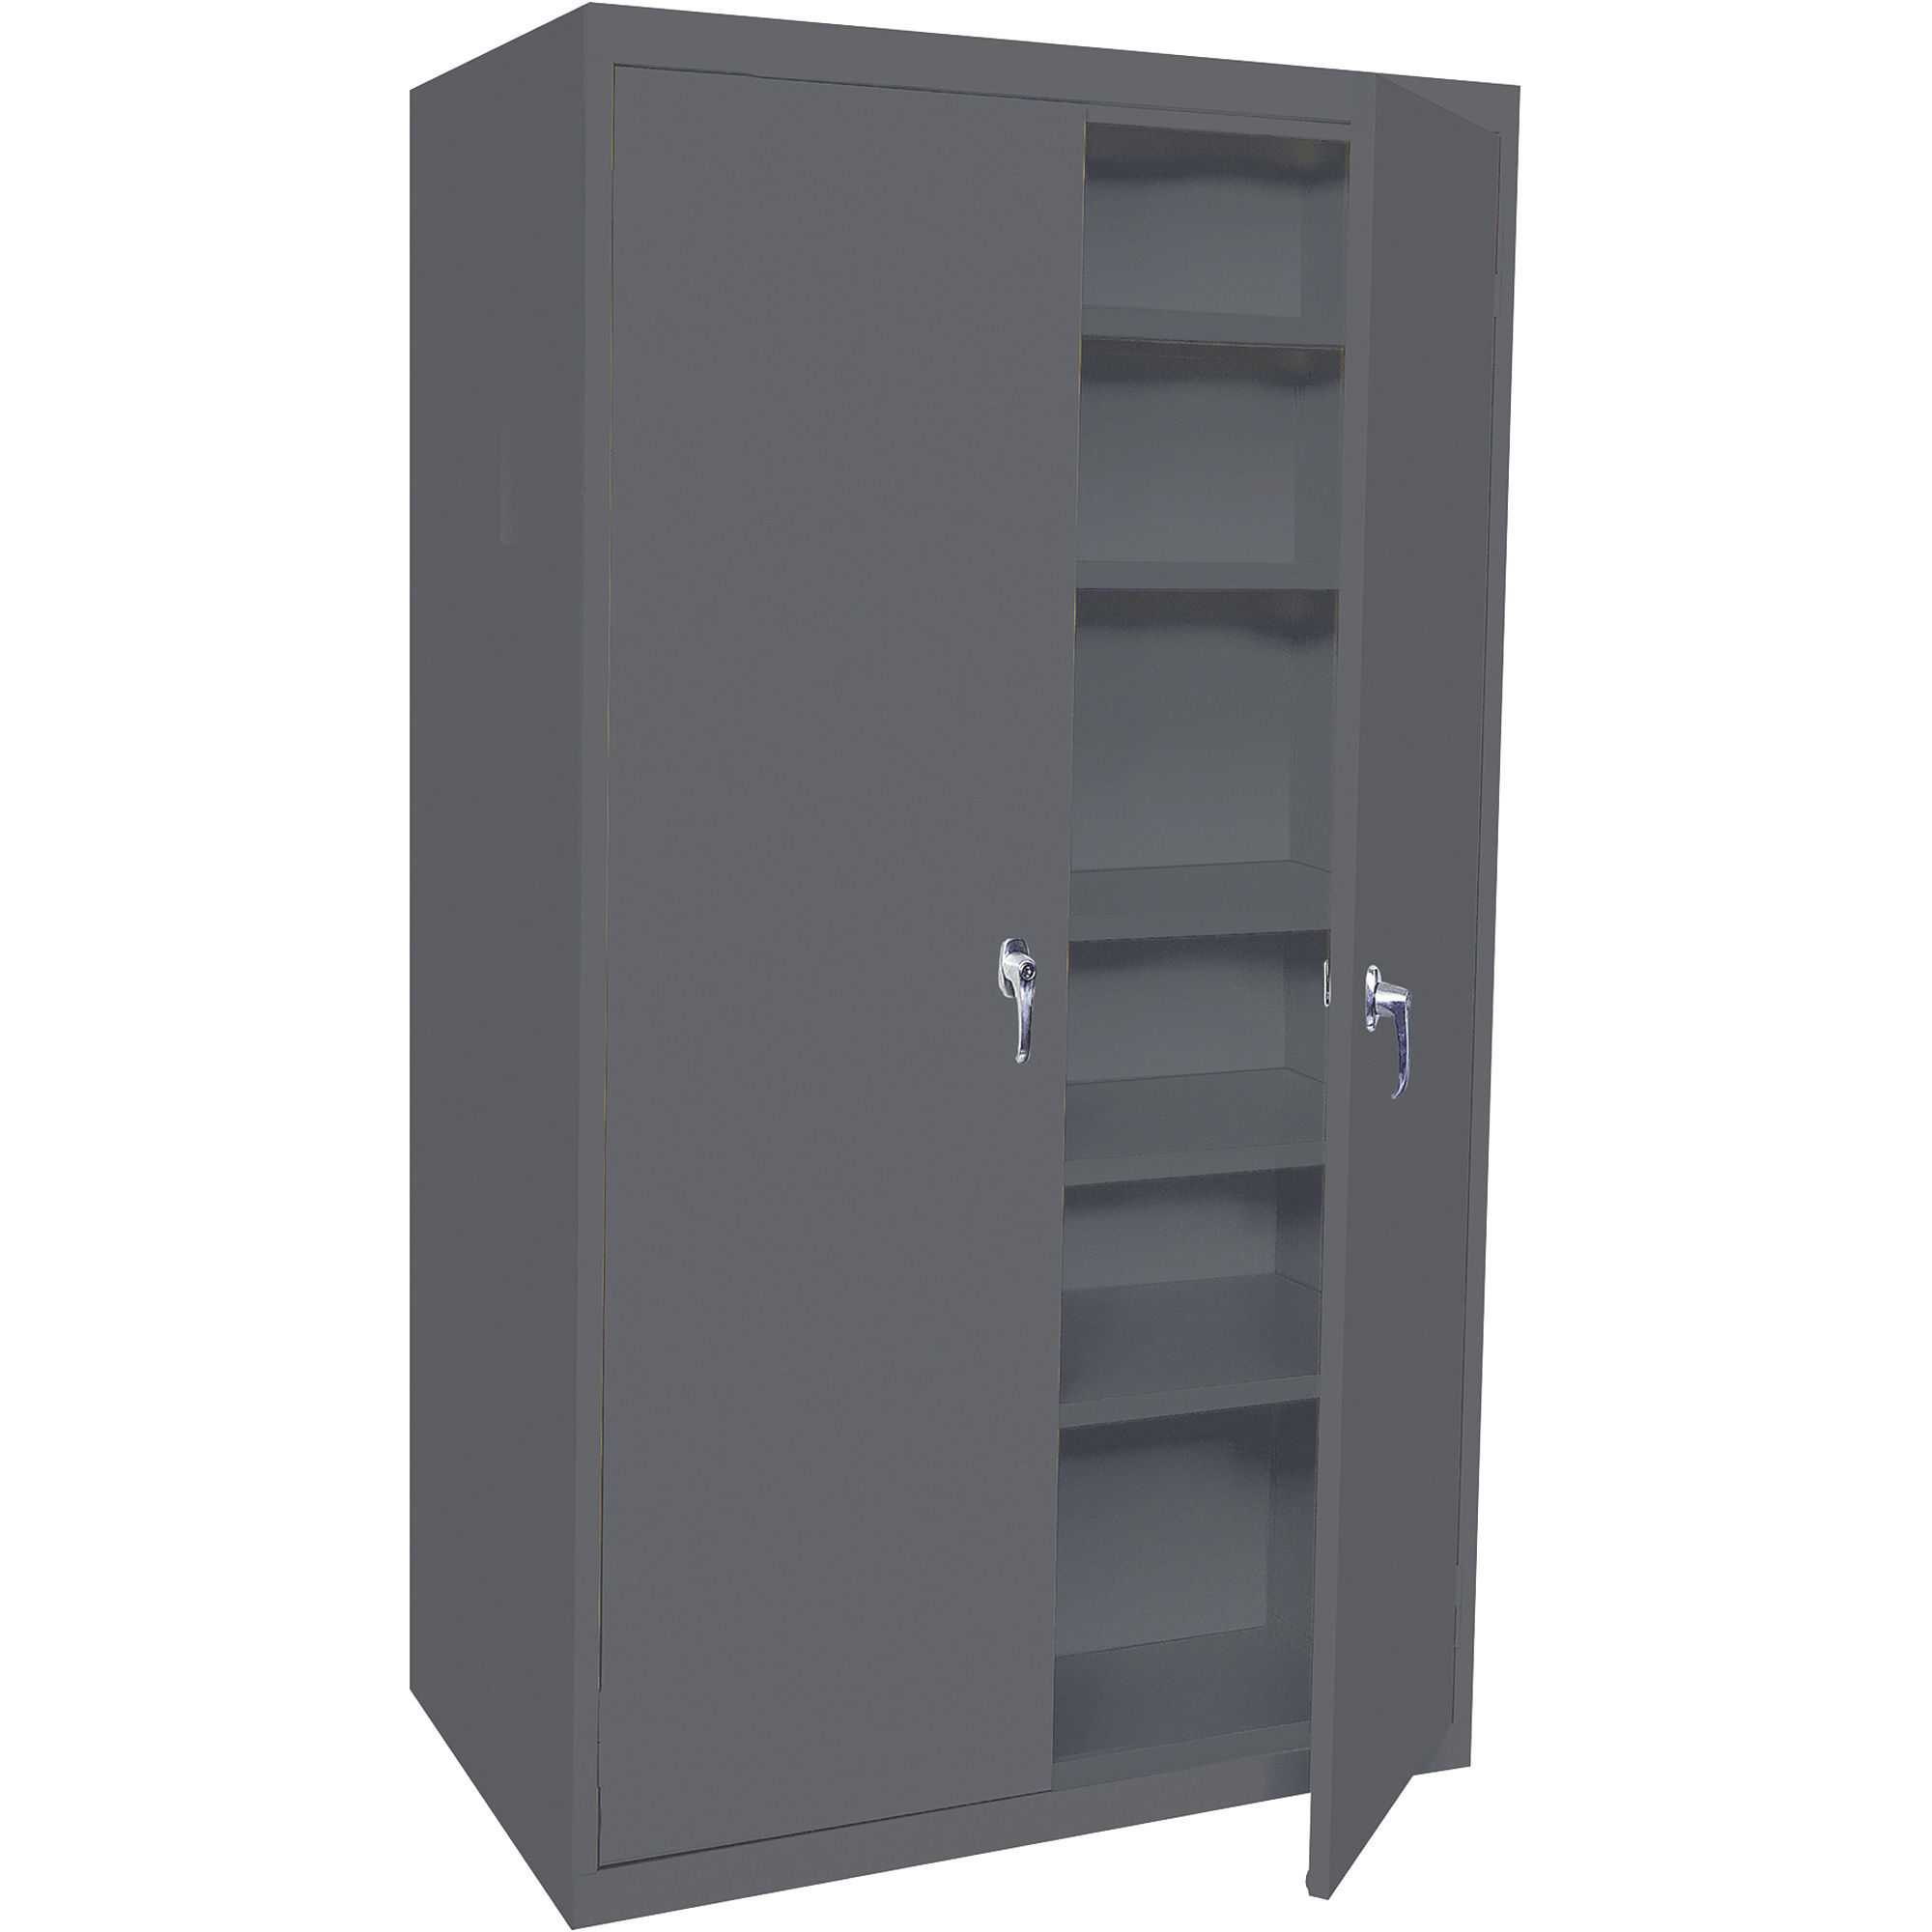 Storage Cabinet — Charcoal, 5 Fixed Shelves, 36Inch W x 18Inch D x 78Inch H, Model - Steel Cabinets USA 5-7818-FS-CHAR